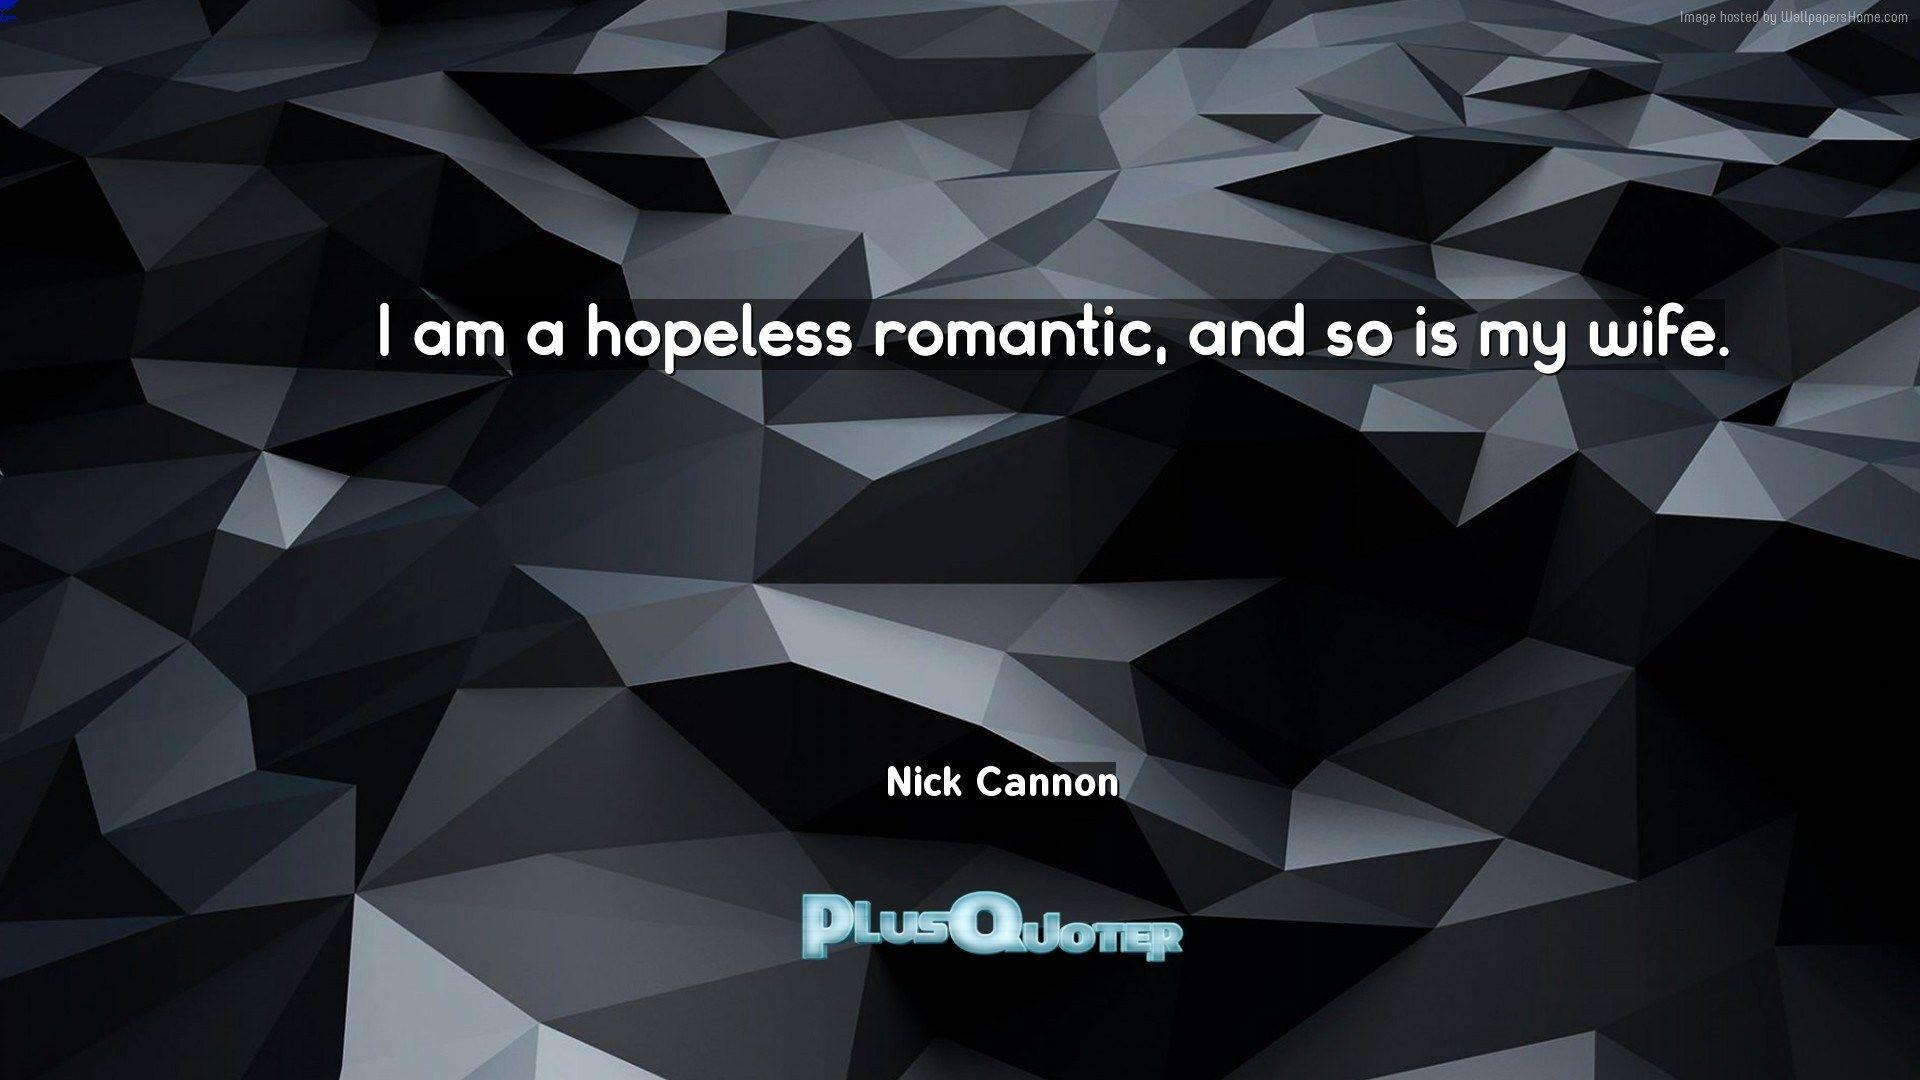 I am a hopeless romantic, and so is my wife- Nick Cannon